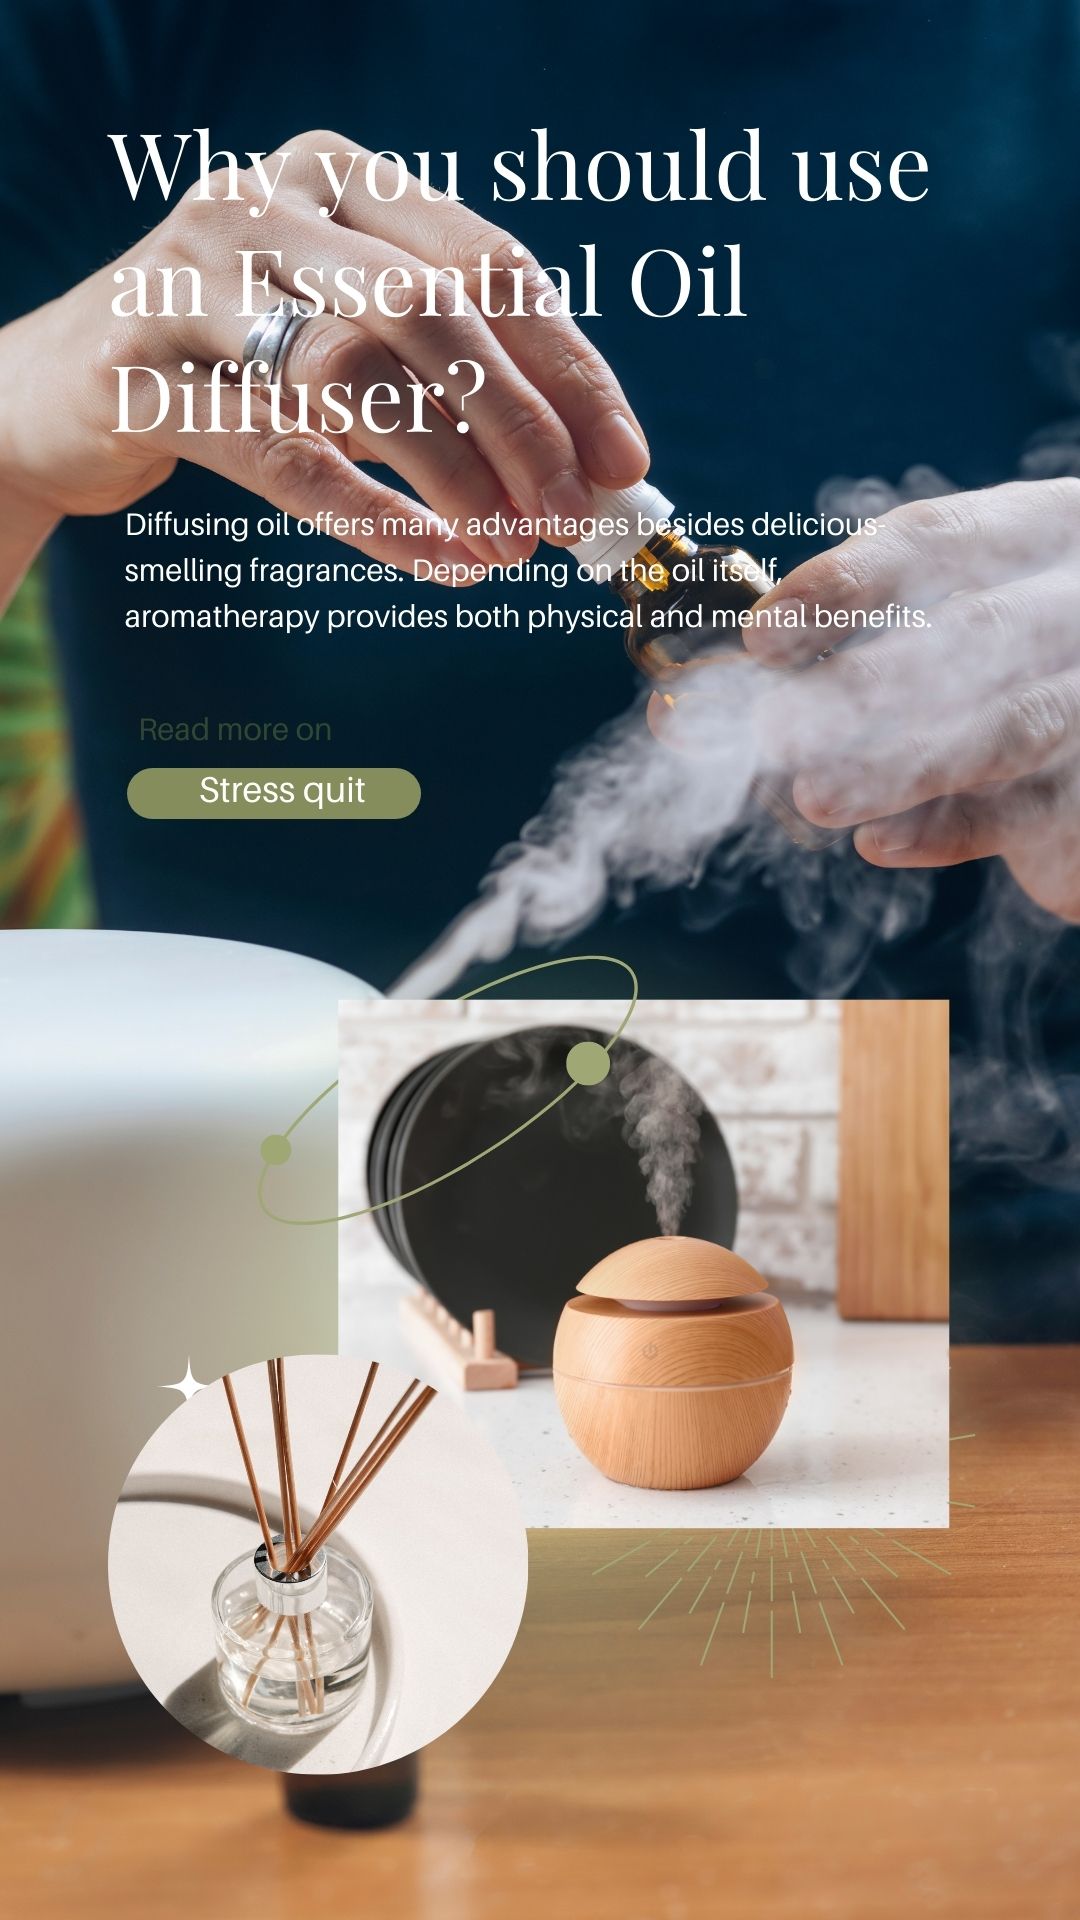 3 Surprising Benefits of Aromatherapy Oil Diffusers: How to use aromatherapy oil diffusers to improve your health and well-being